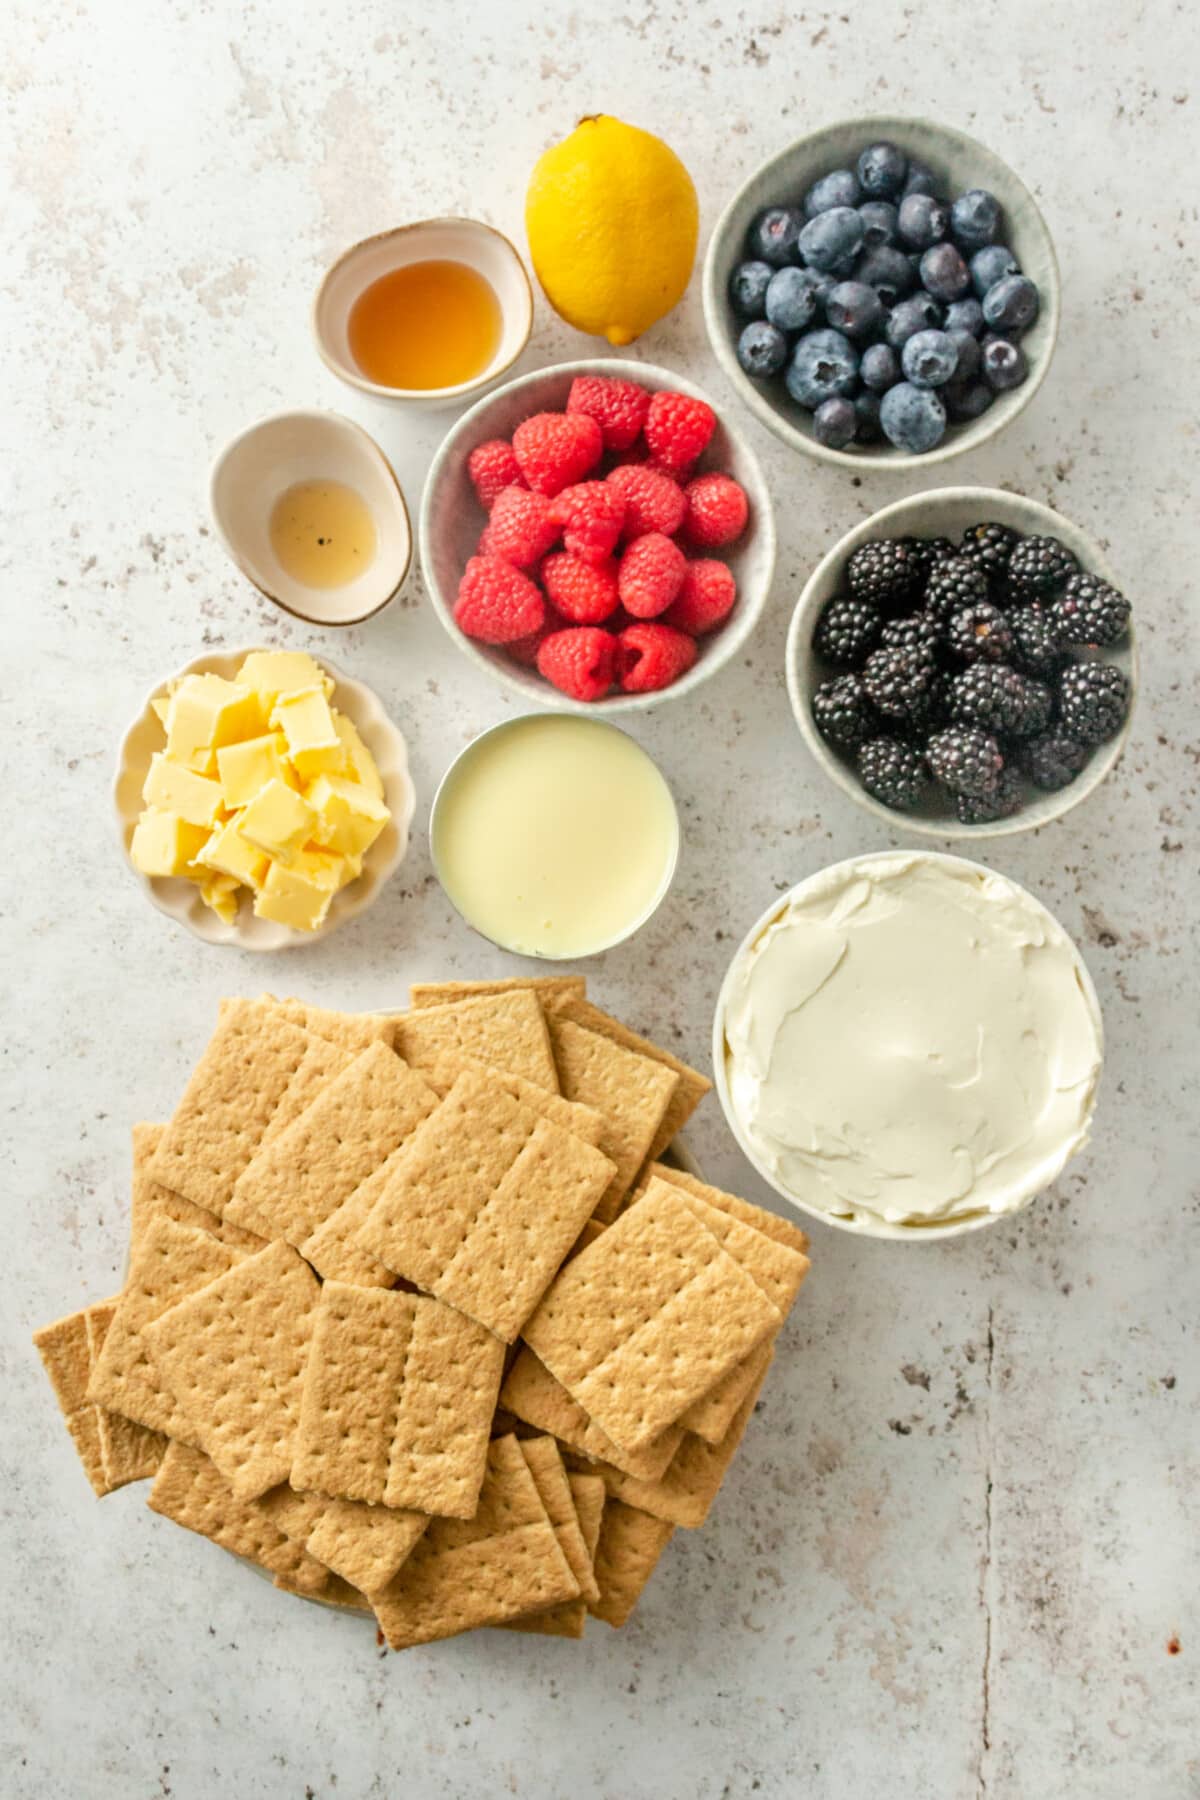 Ingredients for no bake cheesecake bars sit in a variety of bowls on a light grey surface.